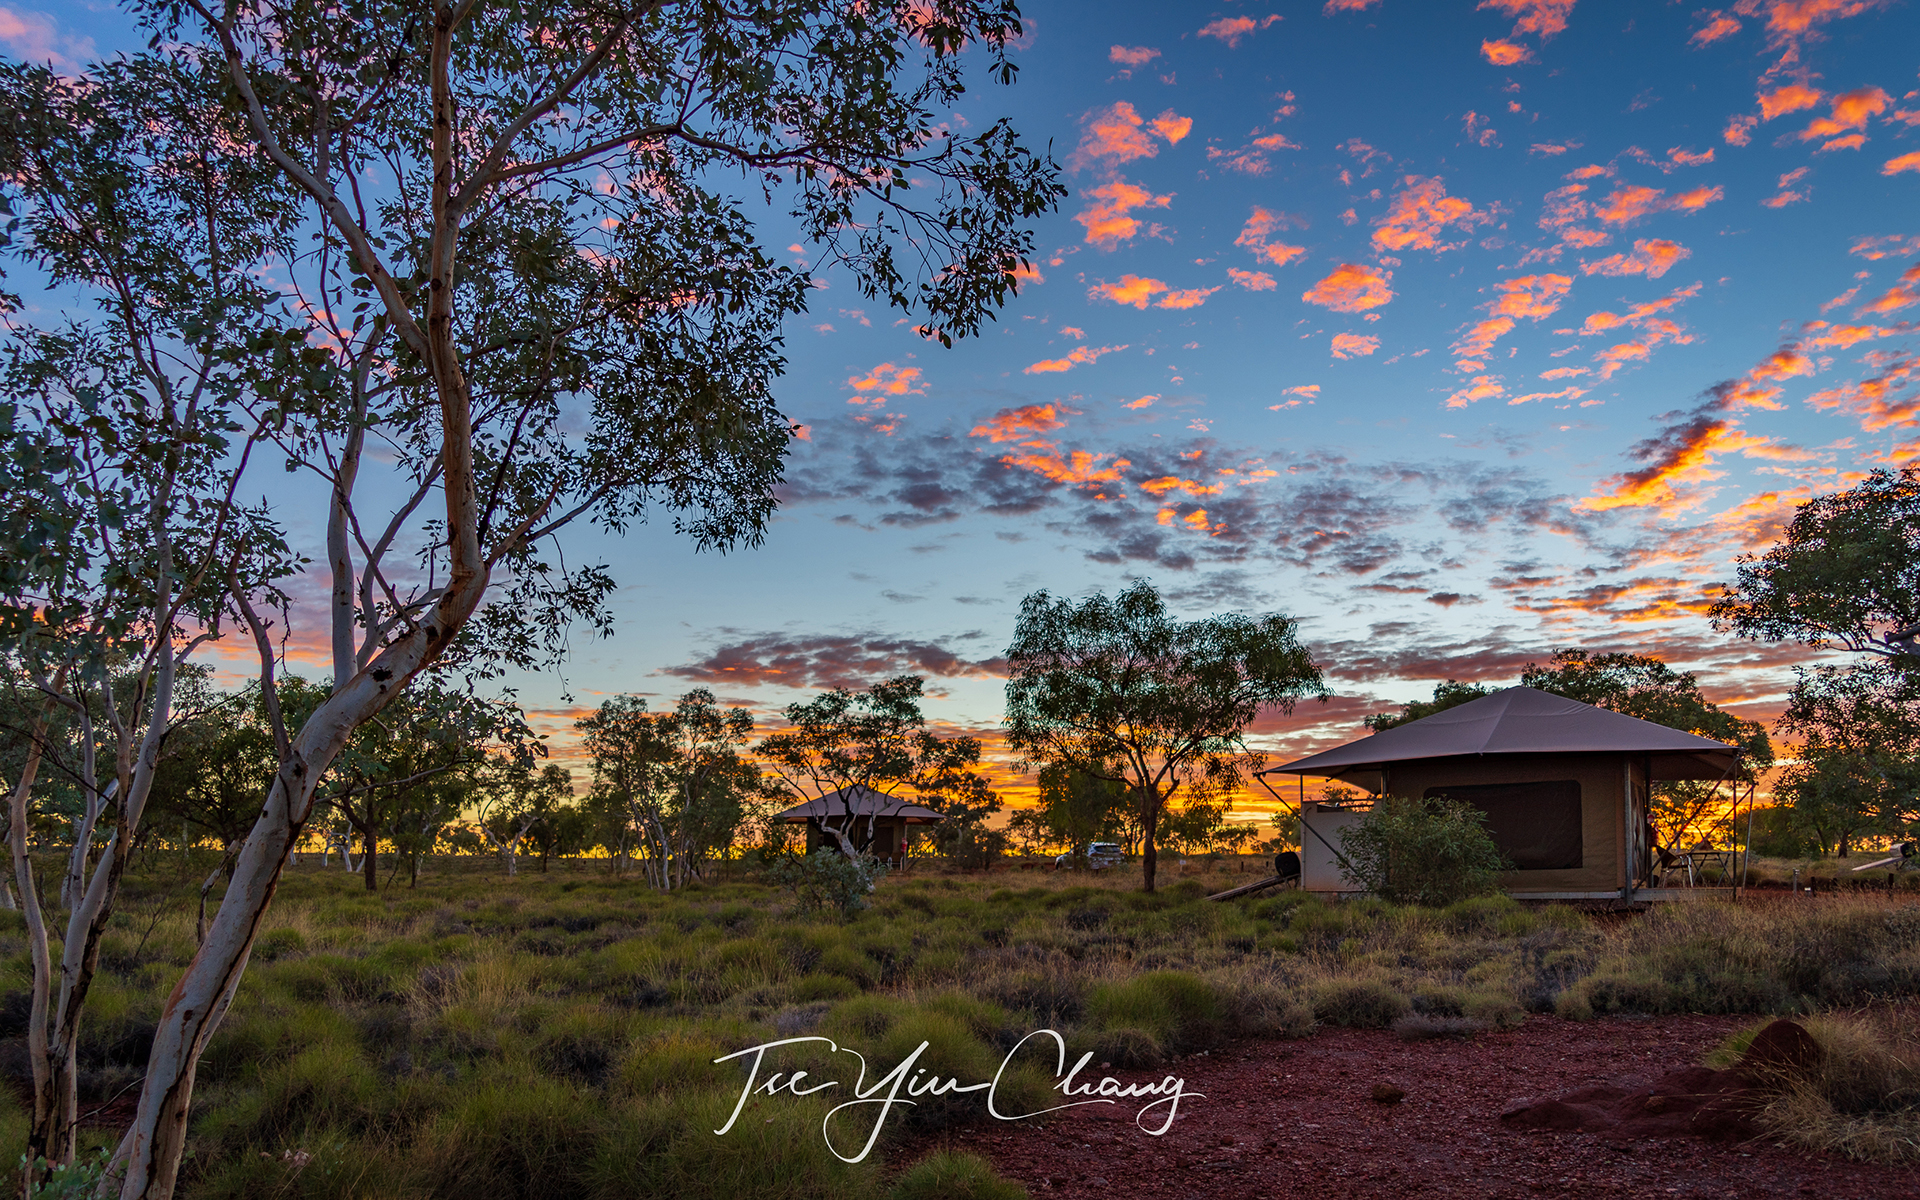 Most of the rooms in Karijini Eco Retreat are actually tents – albeit very luxurious ones – giving you the feeling of being immersed in the remote bush landscape, taken during sunrise